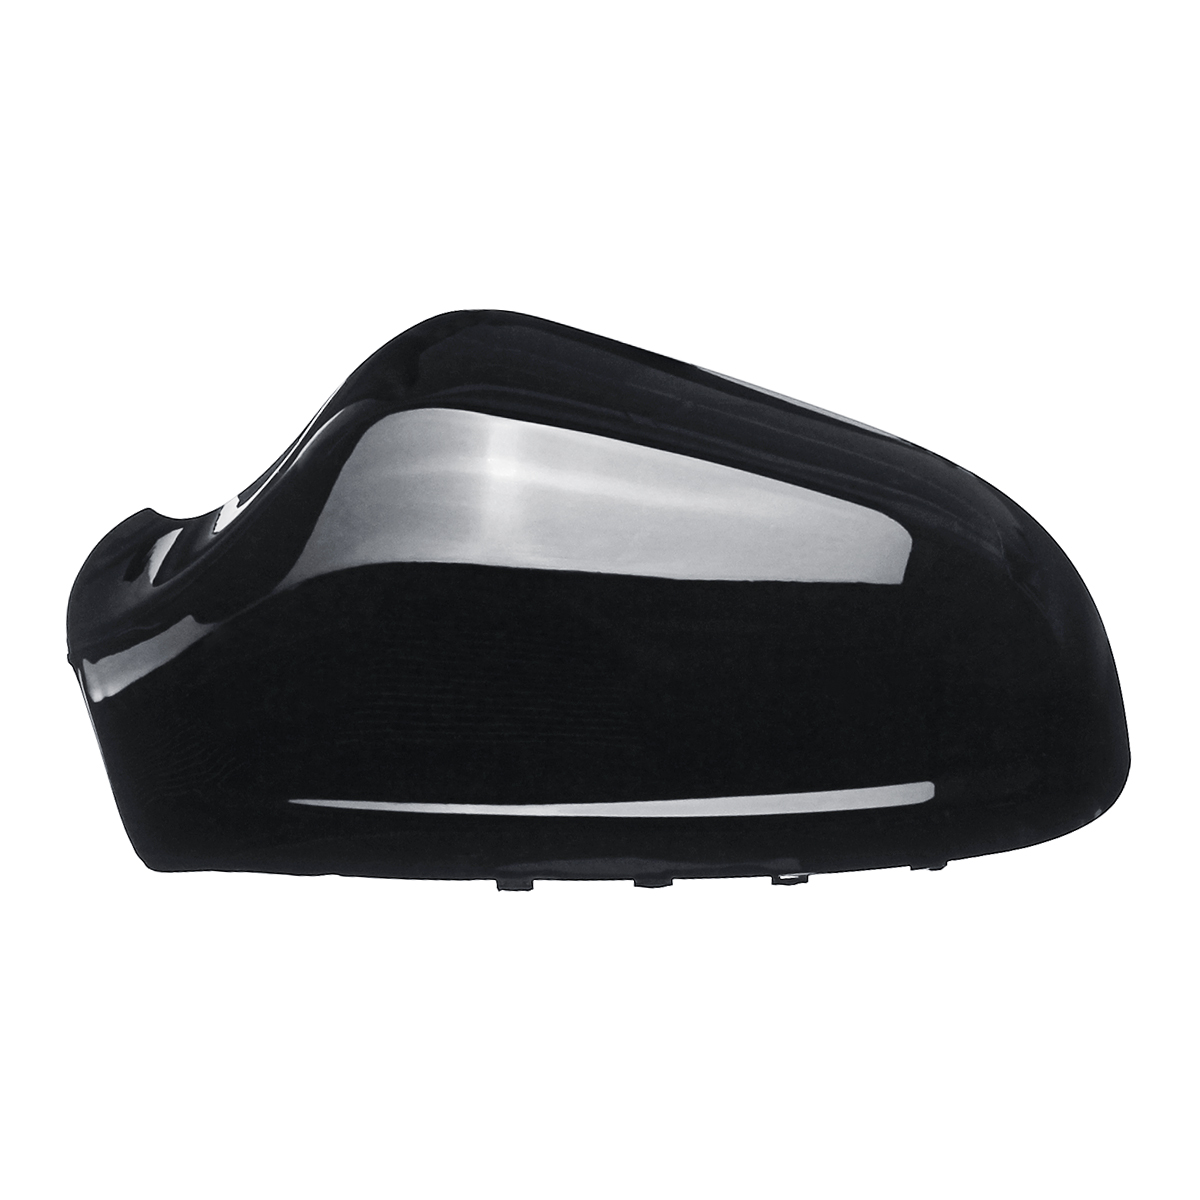 Left/Right Car Rearview Wing Mirror Cover Cap Black for Opel Vauxhall Astra MK5 2010-2013